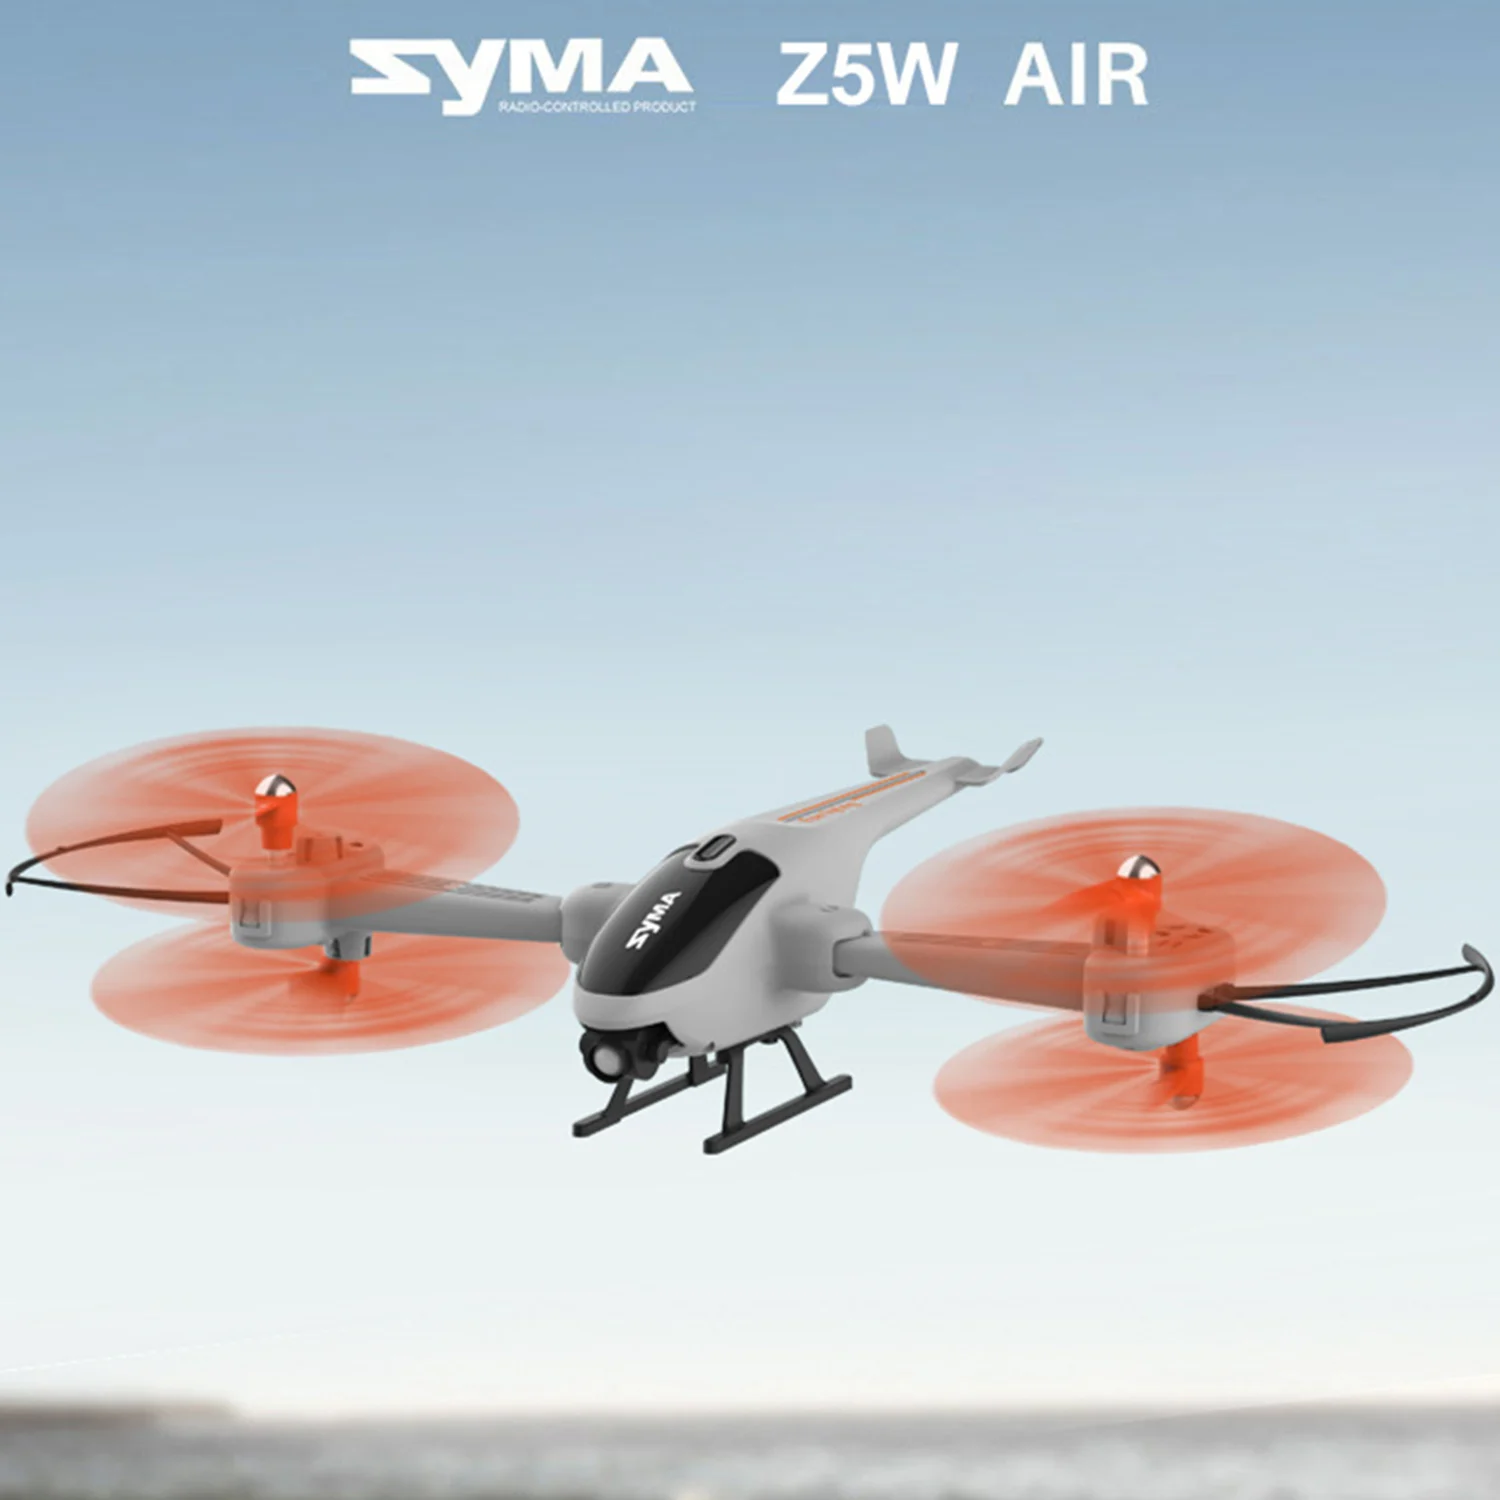 

SYMA Z5W Children's Helicopter Toy Remote Control Fixed Height Aircraft Aerial Photography Drone